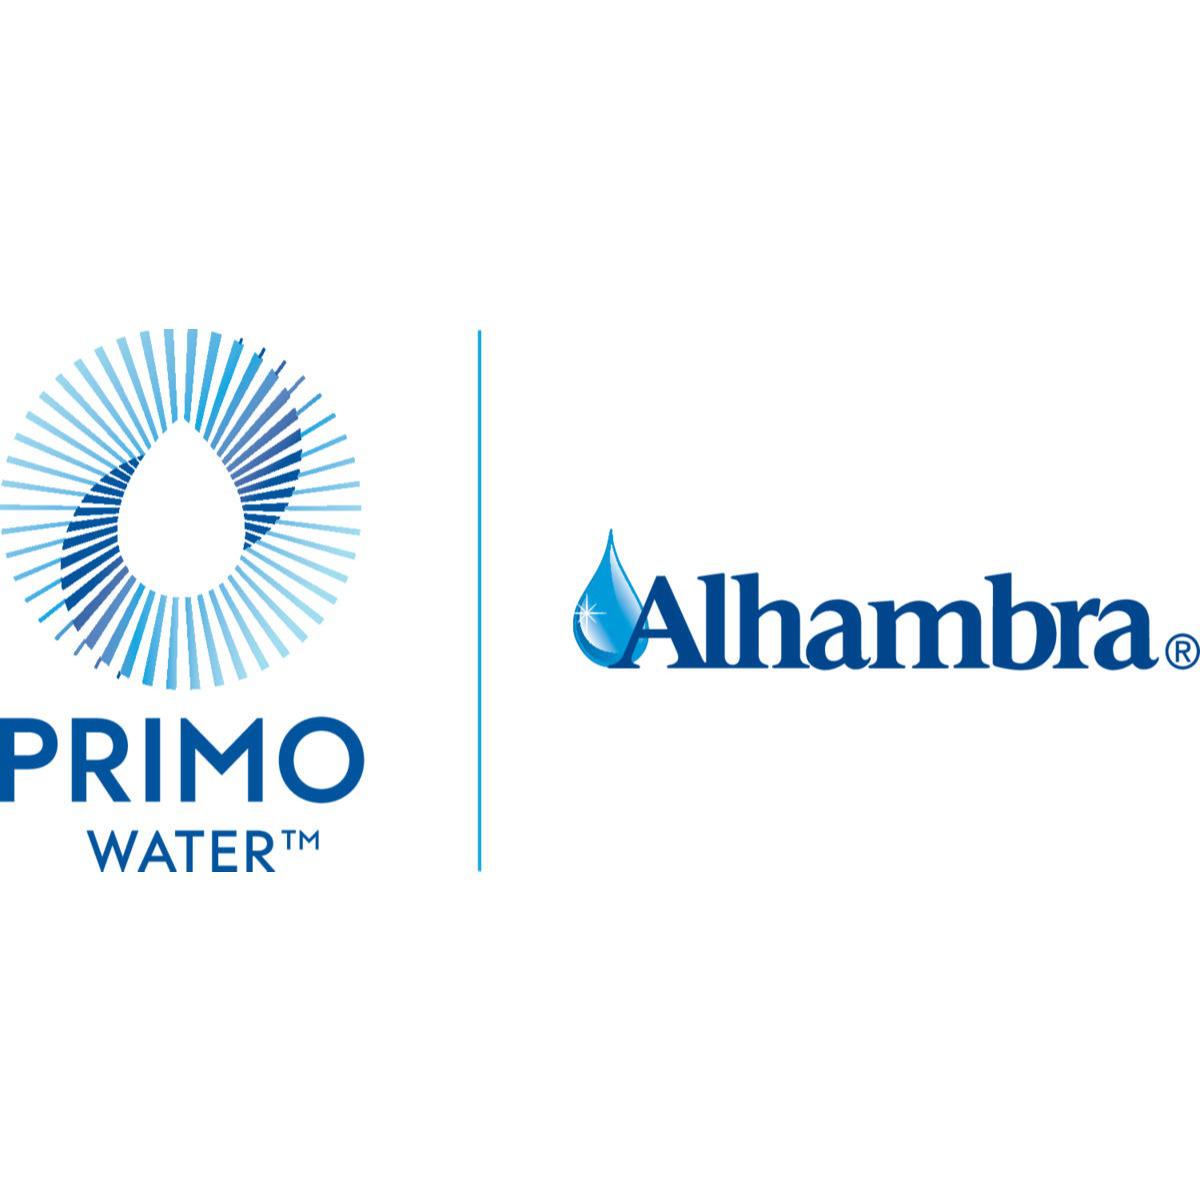 Alhambra Water Delivery Service 4550